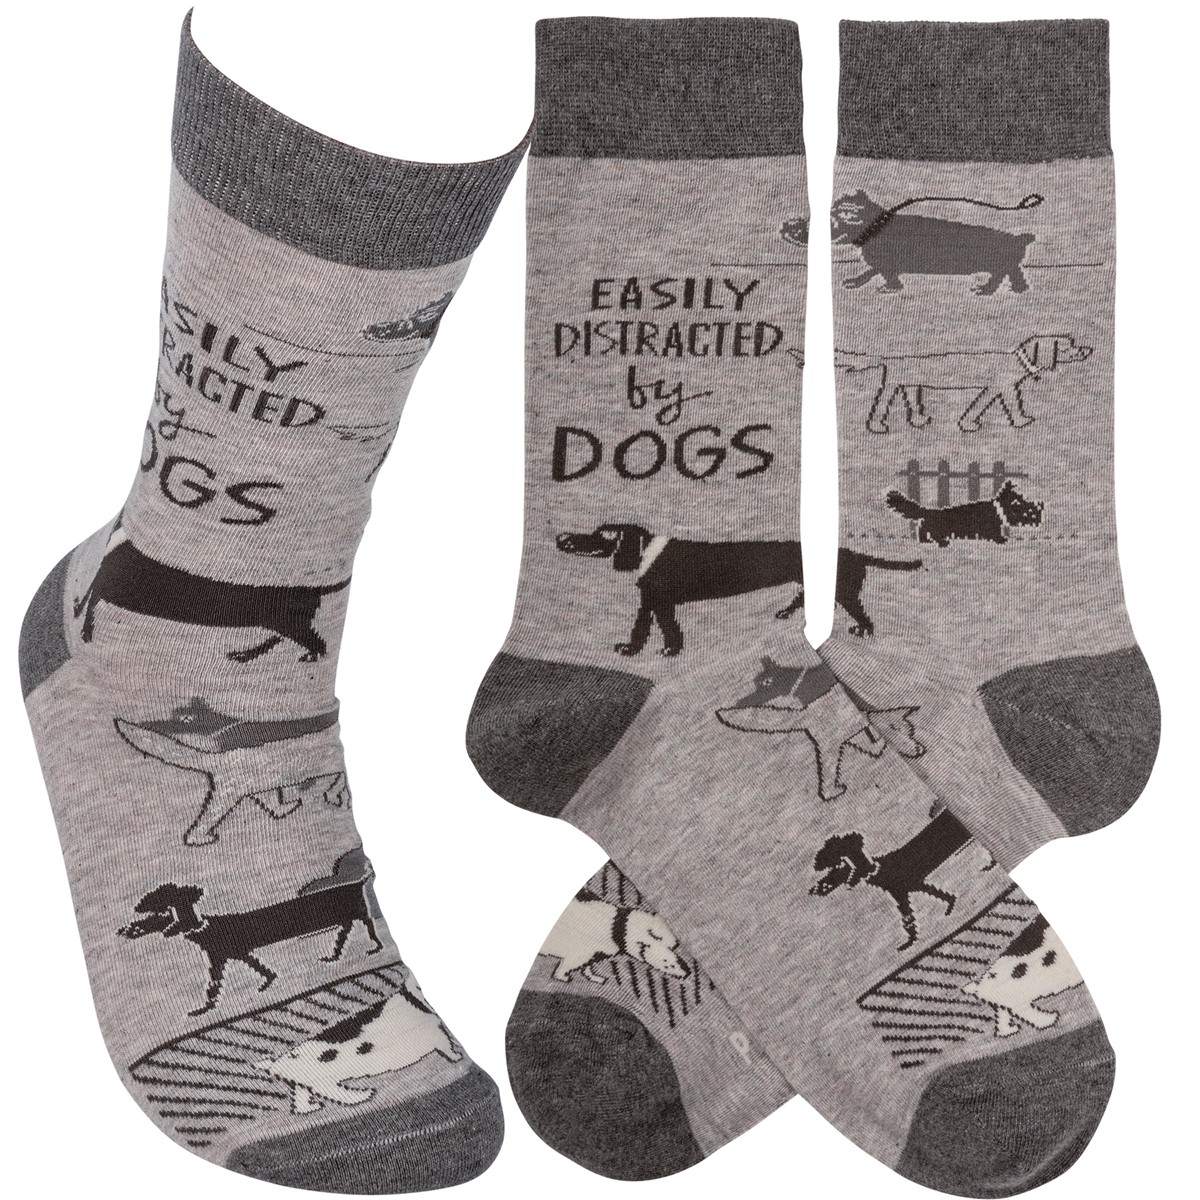 Socks - Easily Distracted By Dogs - One Size Fits Most - Cotton, Nylon, Spandex